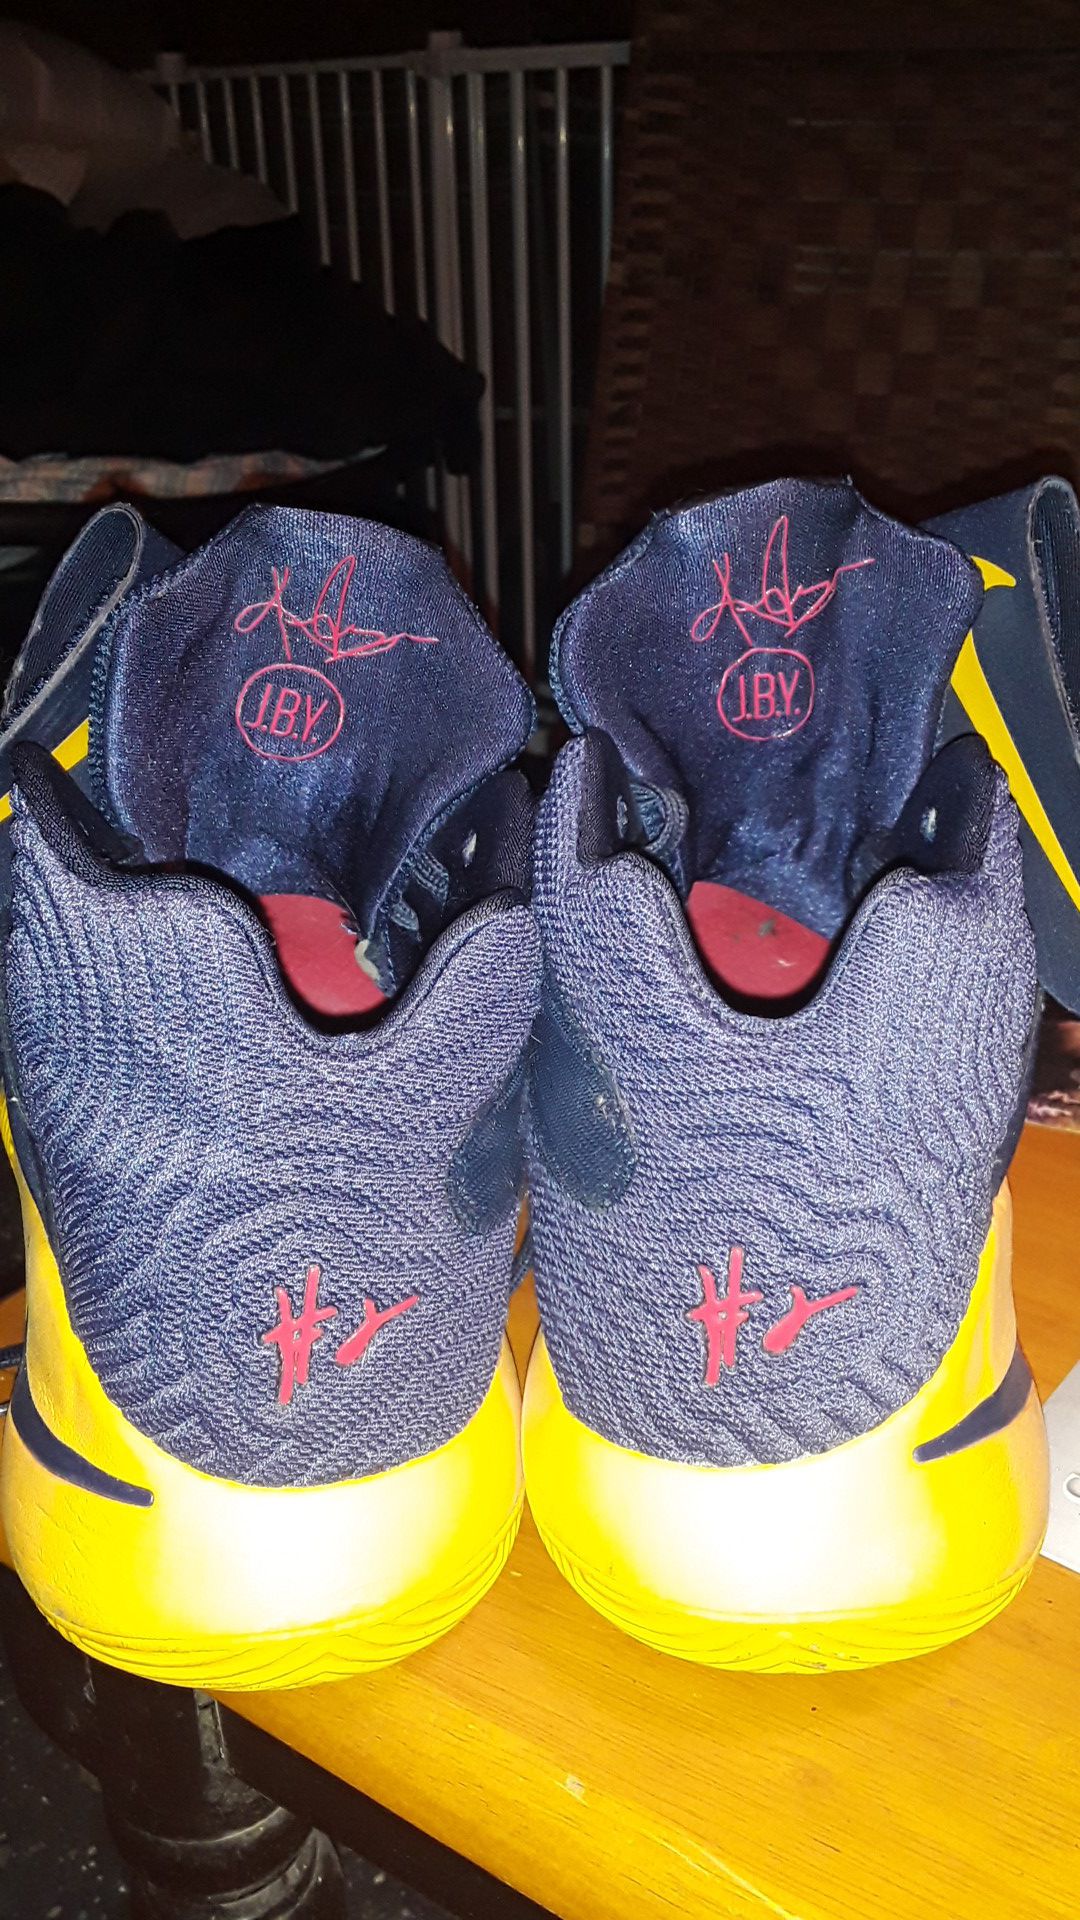 Kyrie Irving's (size 10.5) YOUR SIZE !